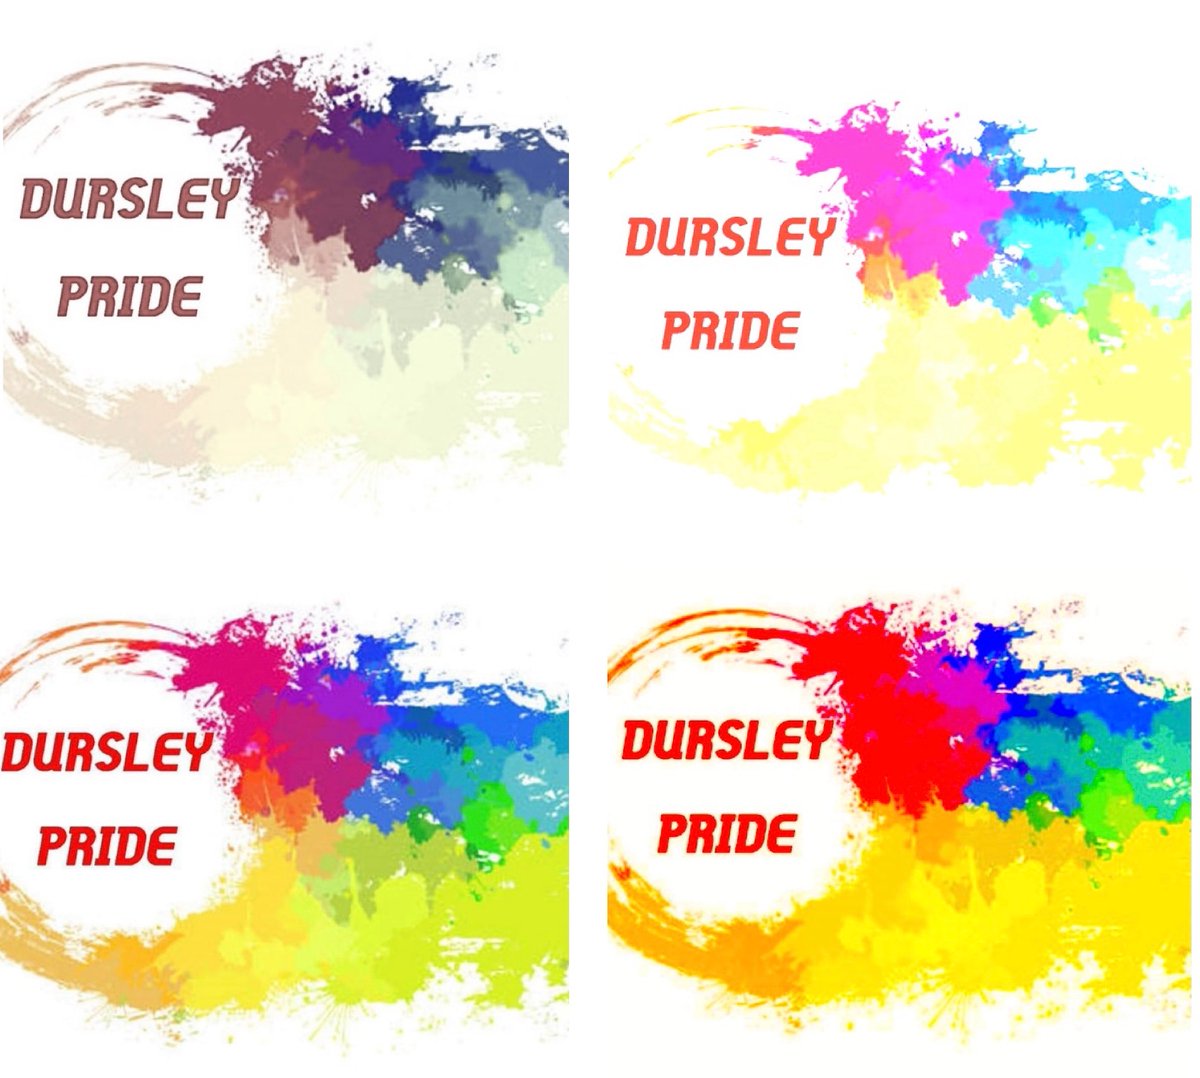 I’d like to give the world a PRIDE And furnish it with hope, With love and NBs Lesbians, gays, bis and trans, And lovely queer rainbow folk, It’s the real thing. Dursley Pride. Saturday 23rd September. All the info at facebook.com/events/s/dursl… 🌈￼